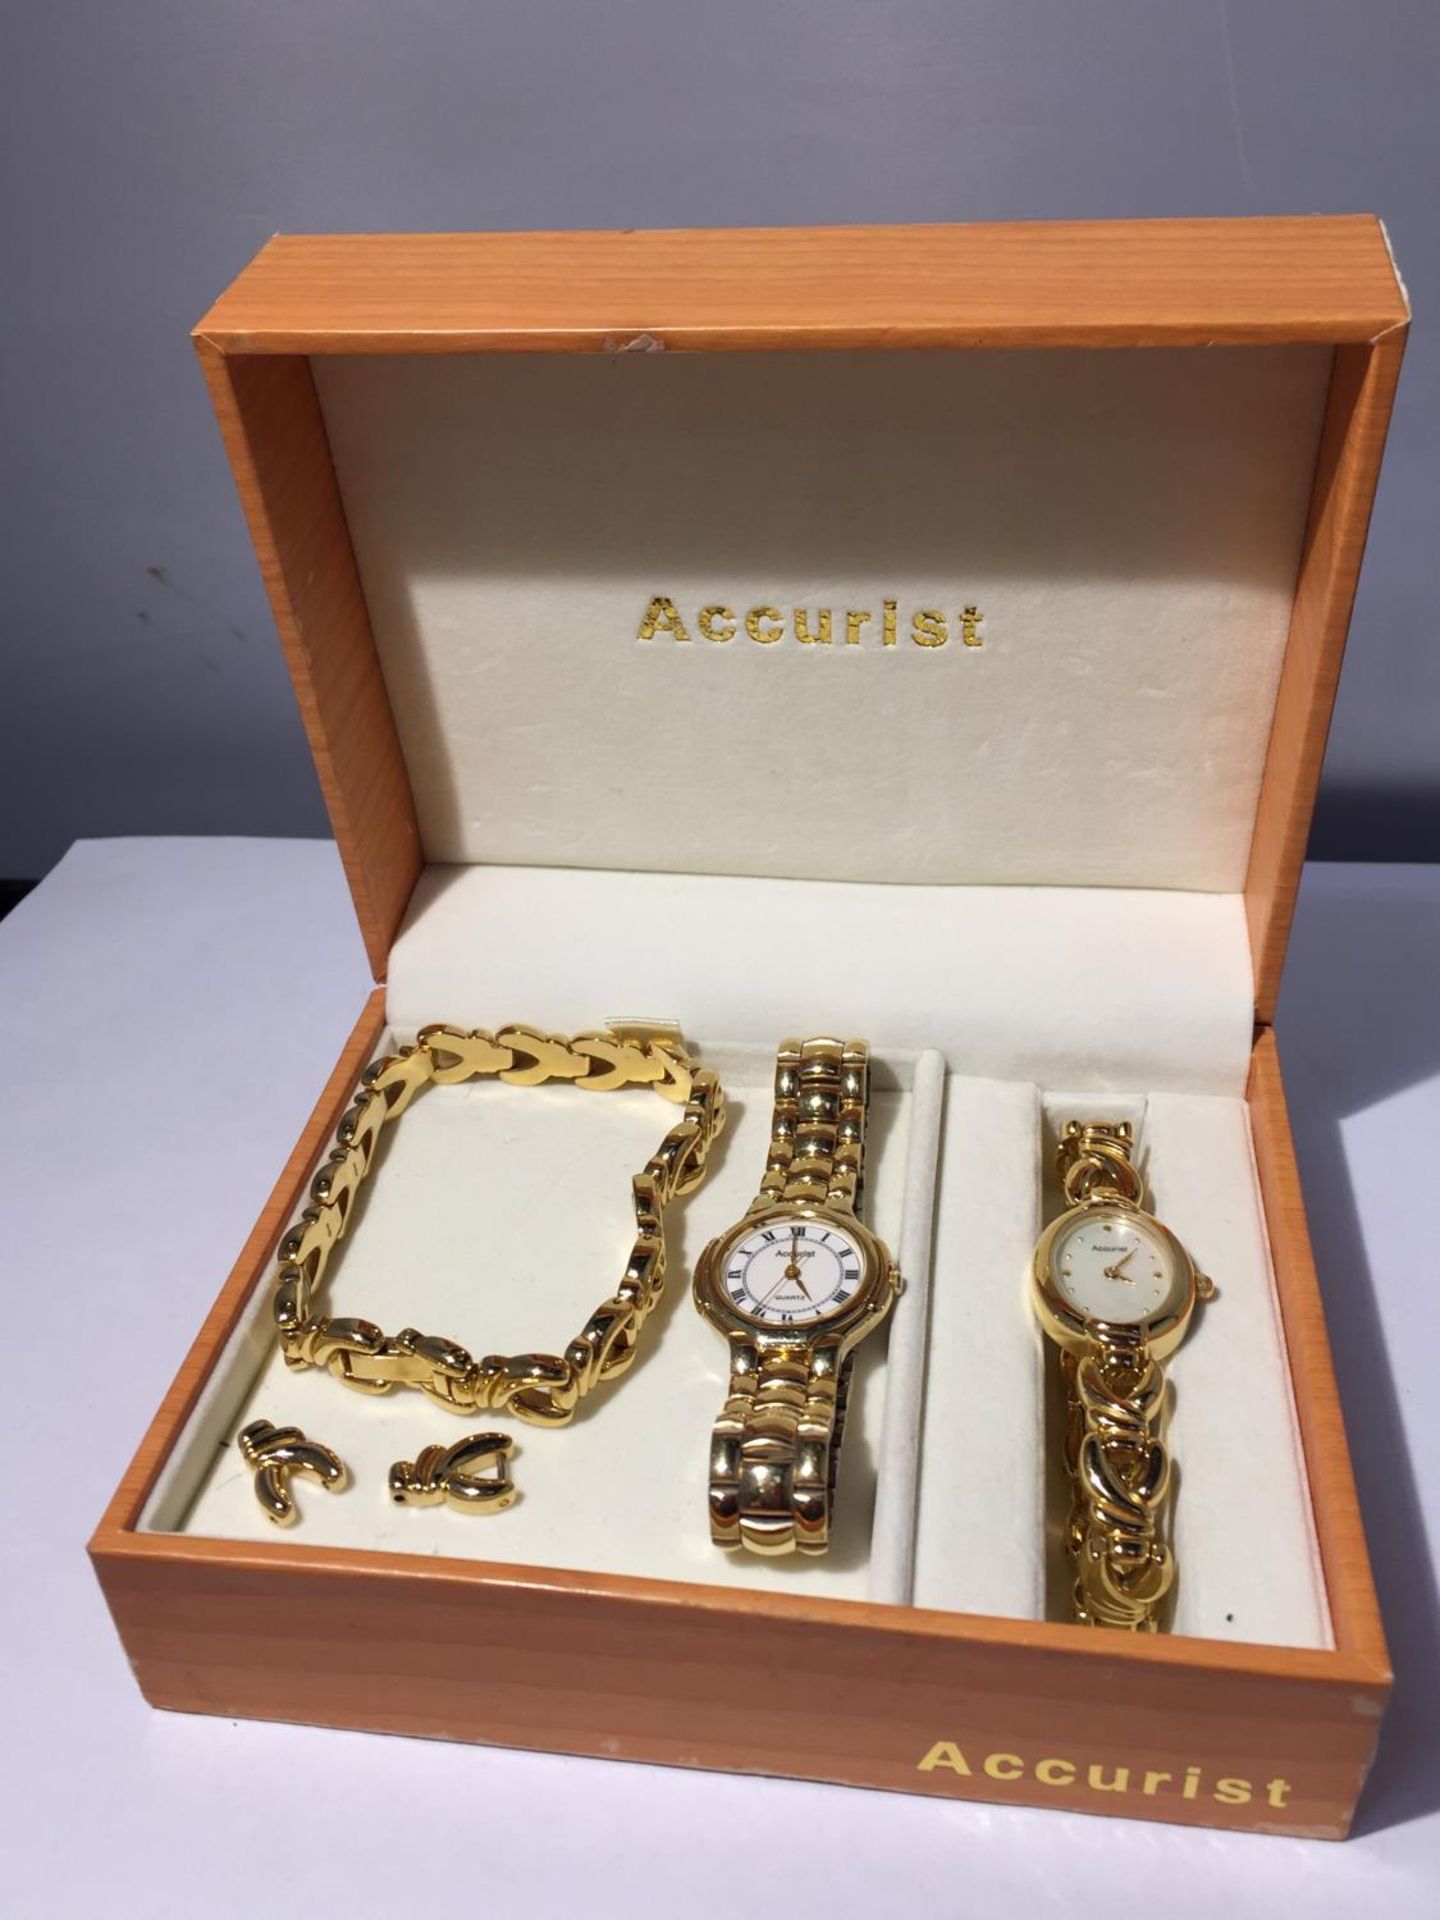 TWO LADIES ACCURIST WRISTWATCHES AND A BRACELET IN A WOODEN PRESENTATION BOX - Image 2 of 2